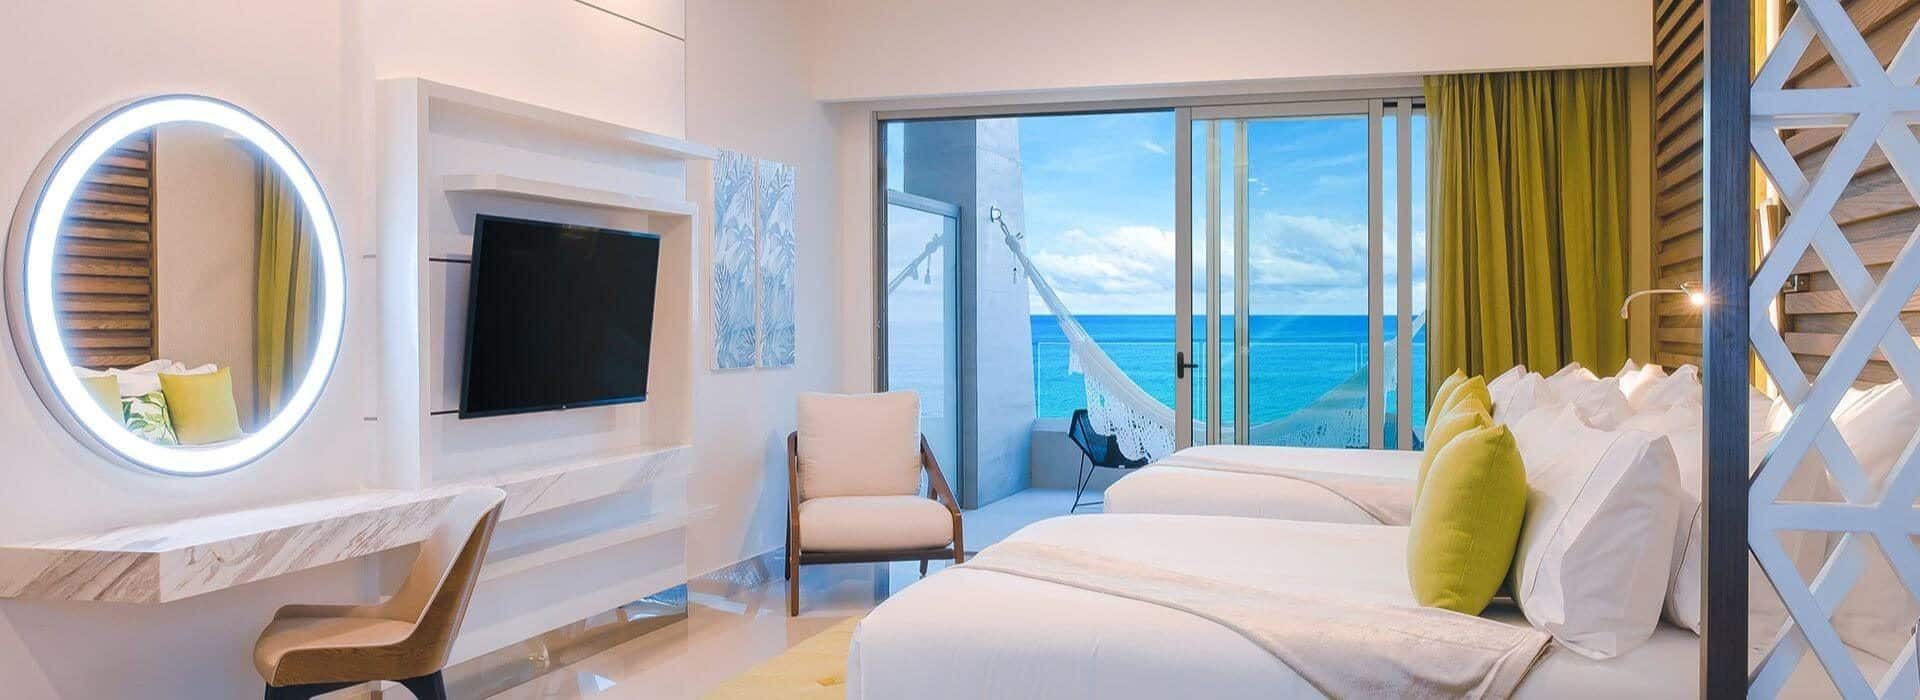 Bedroom with 2 beds with white linens, green accent pillows and throws, a writing desk with lighted circular mirror above it, a flat screen TV, and sliding glass doors leading out to a patio with ocean views